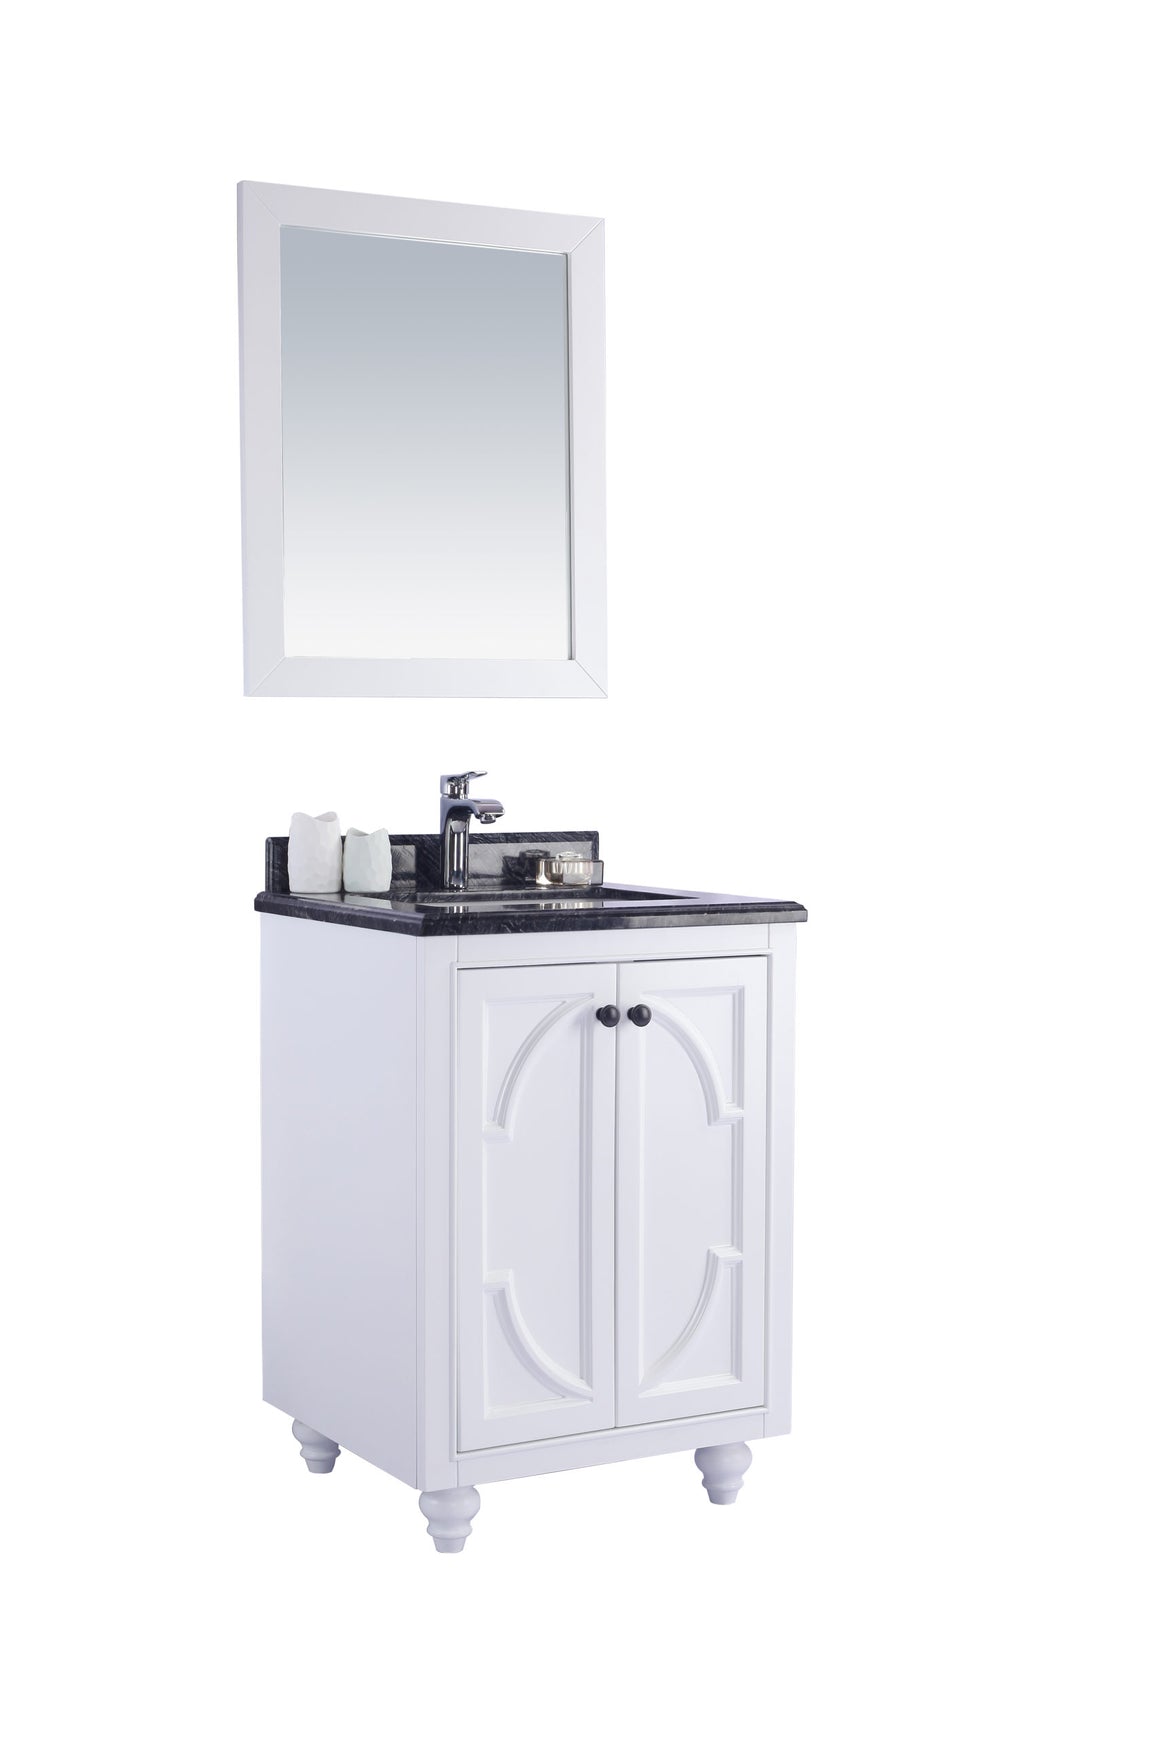 Odyssey - 24 - White Cabinet + Black Wood Marble Countertop